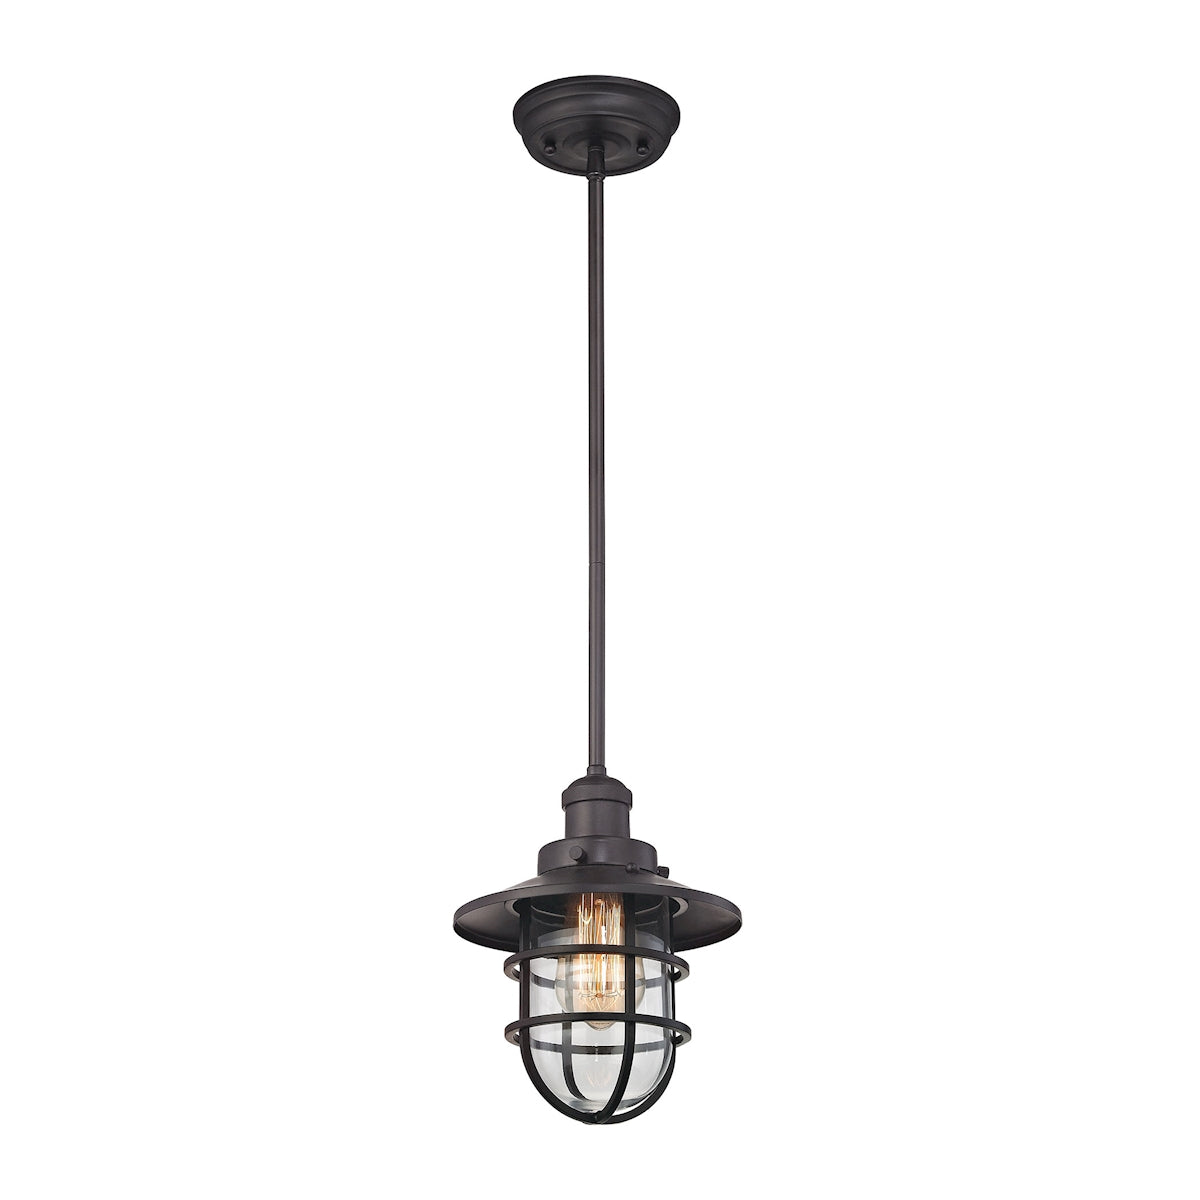 ELK Lighting 66364/1 Seaport 1-Light Mini Pendant in Oil Rubbed Bronze with Clear Glass